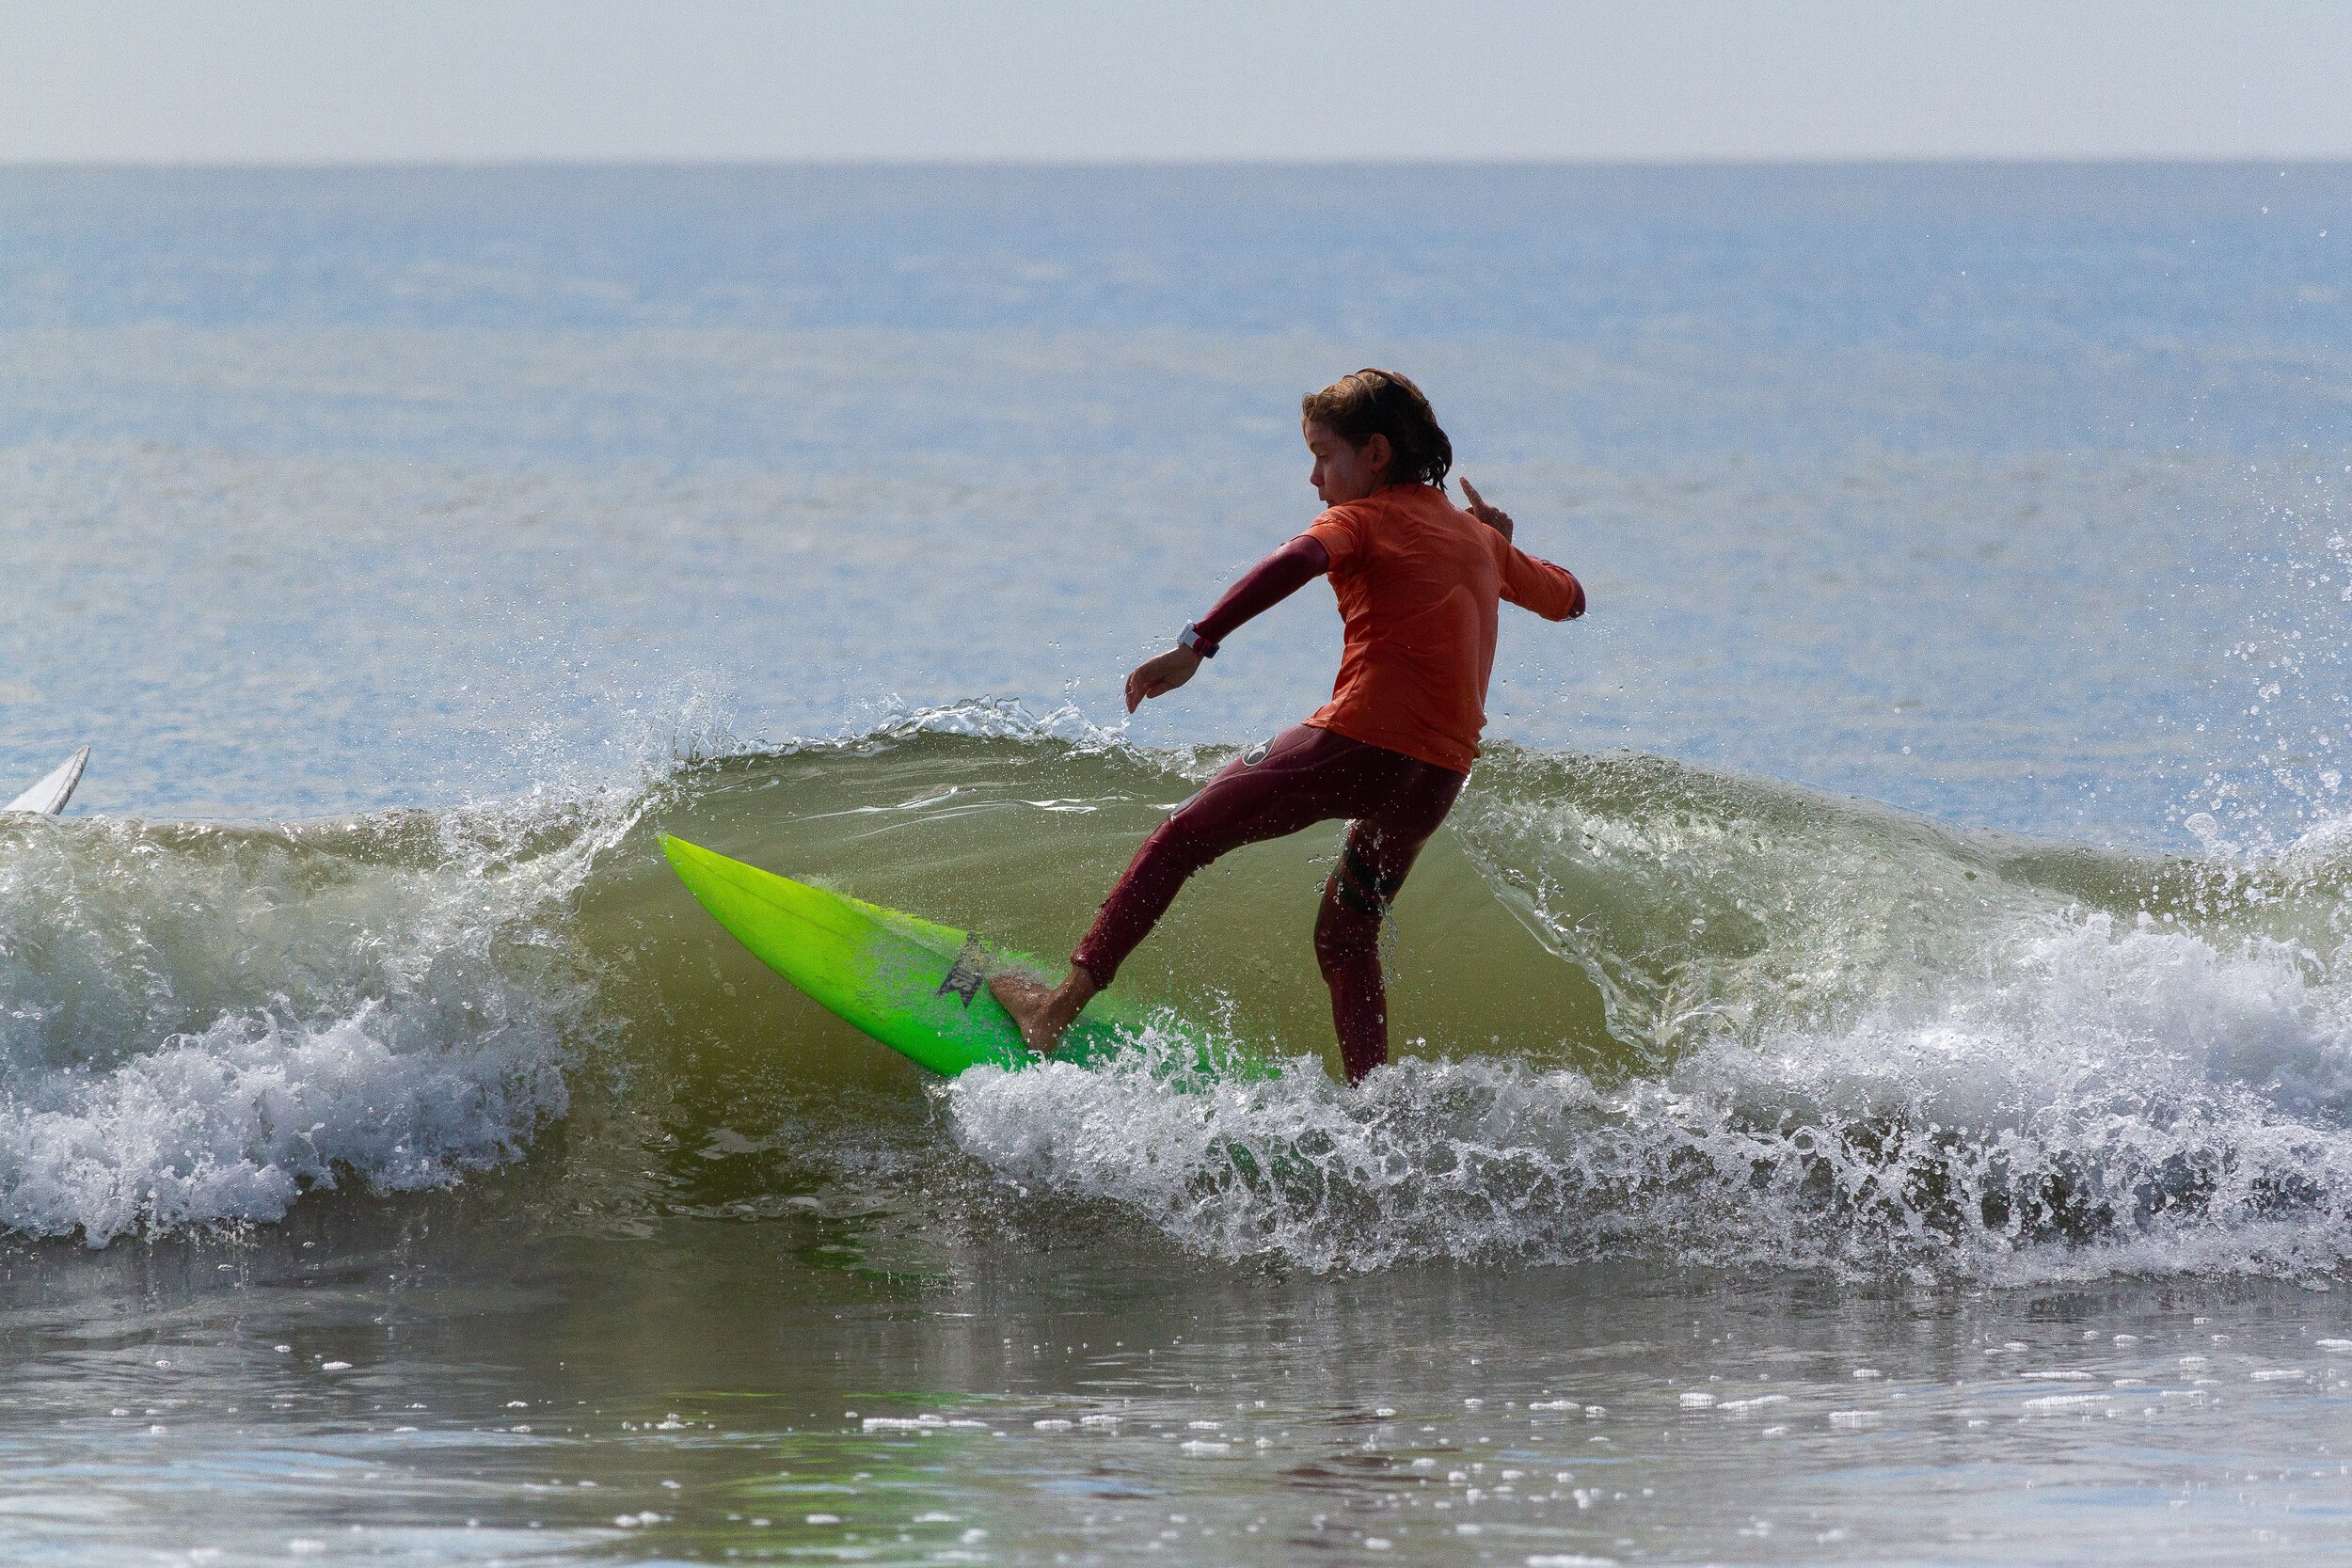   A young surfer catches a good wave at Sunday's 15th Annual Richie Allen Memorial Surf Classic.  